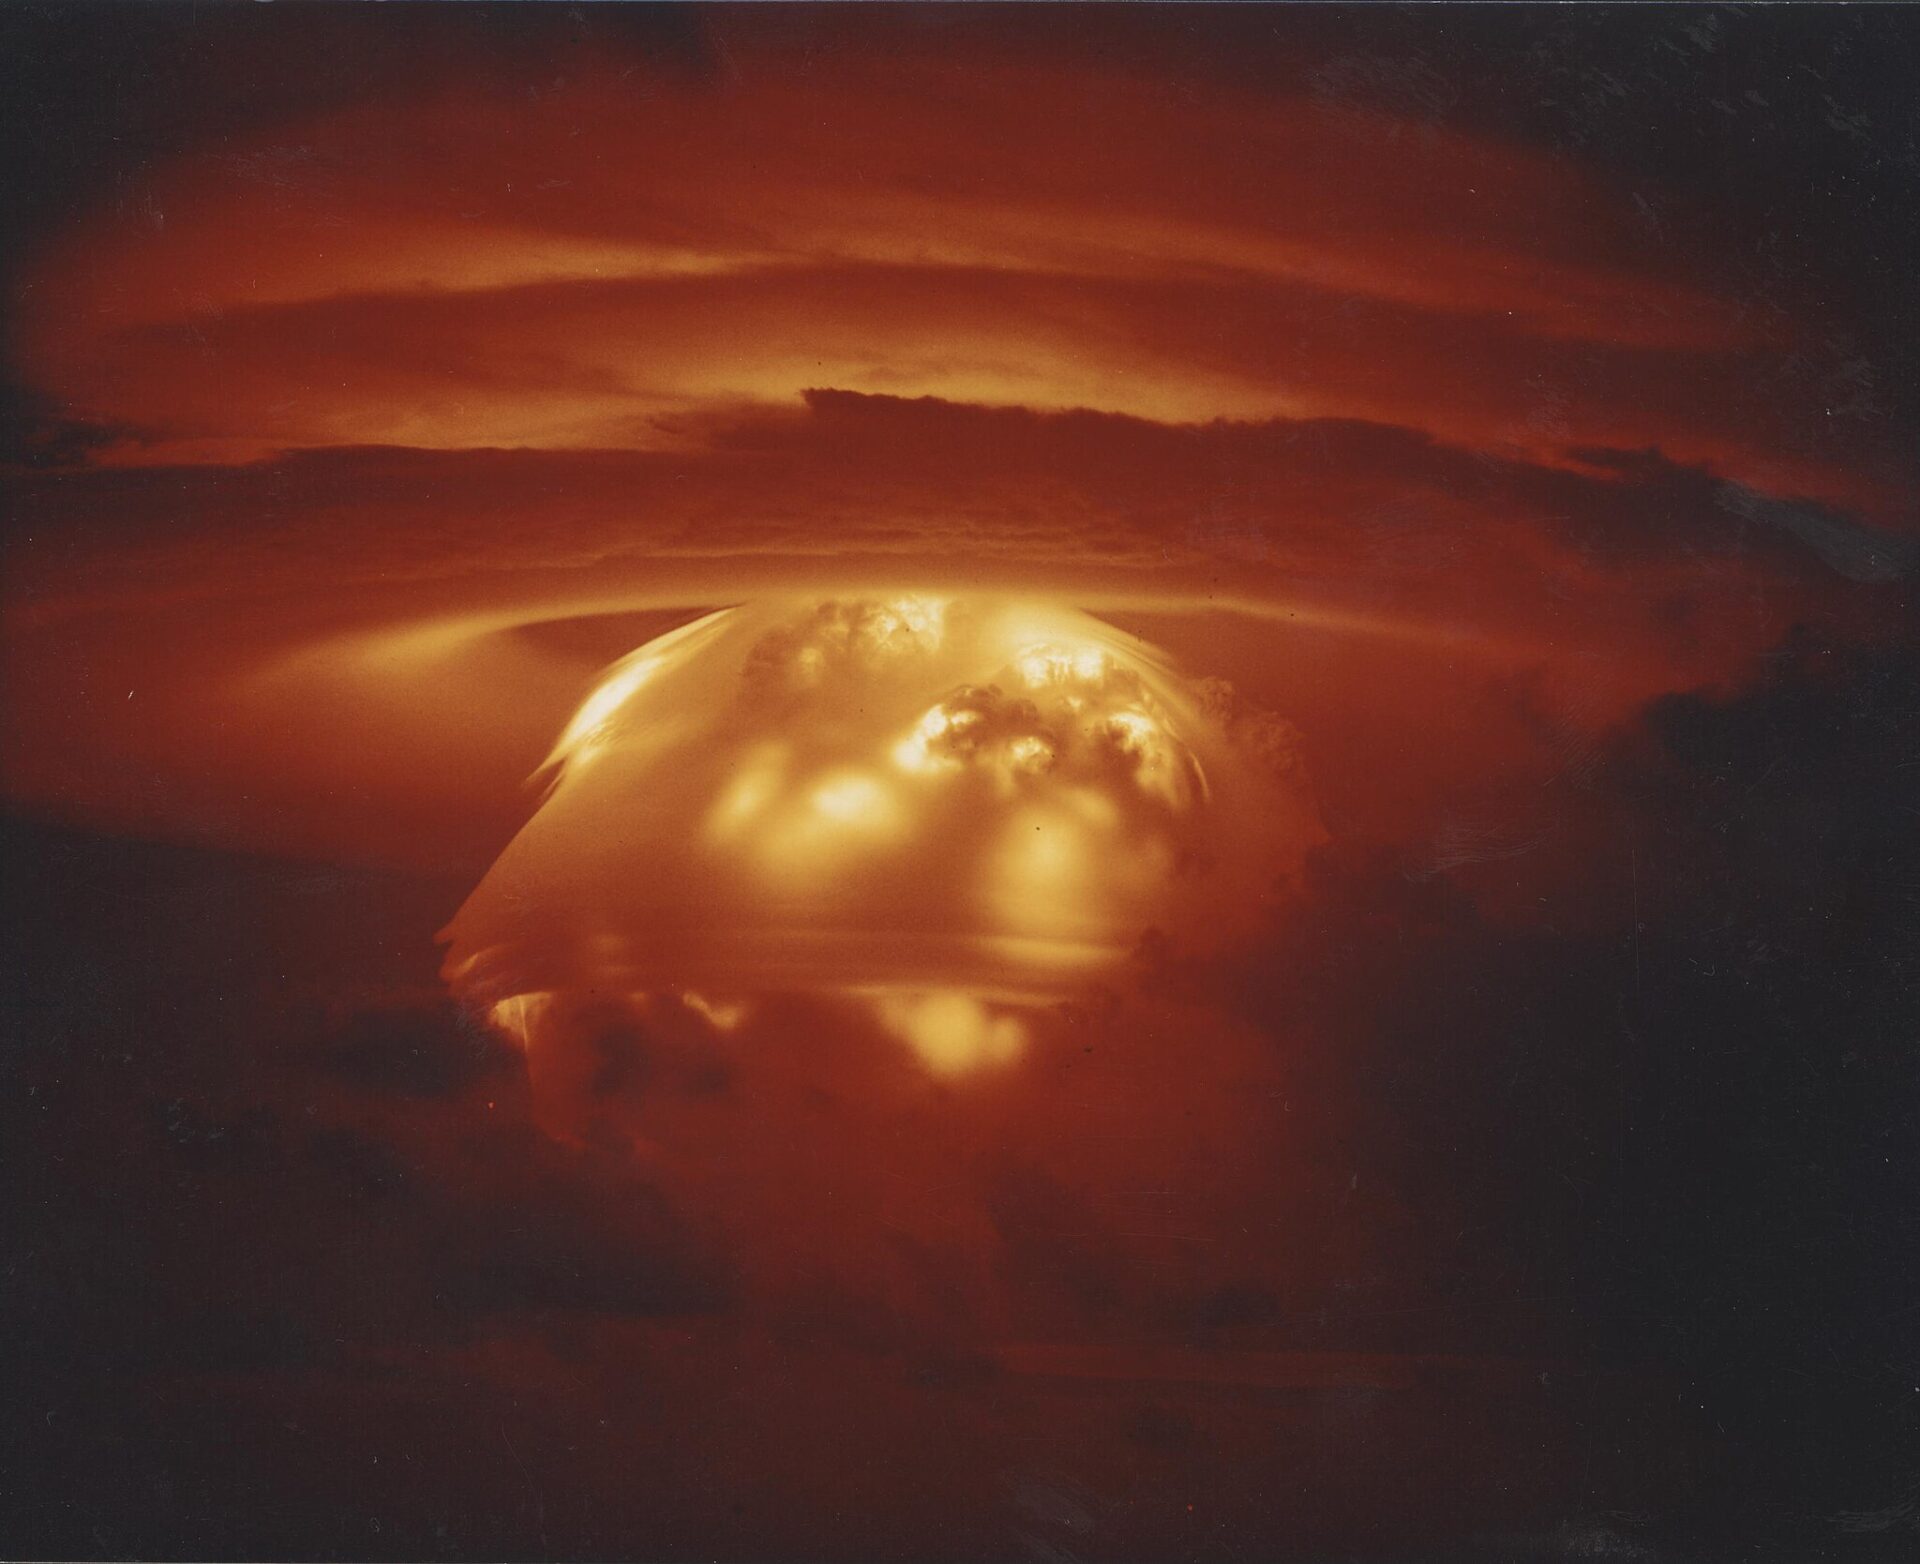 Castle Bravo nuclear test on March 1, 1954 (Energy.gov via Wikimedia Commons)